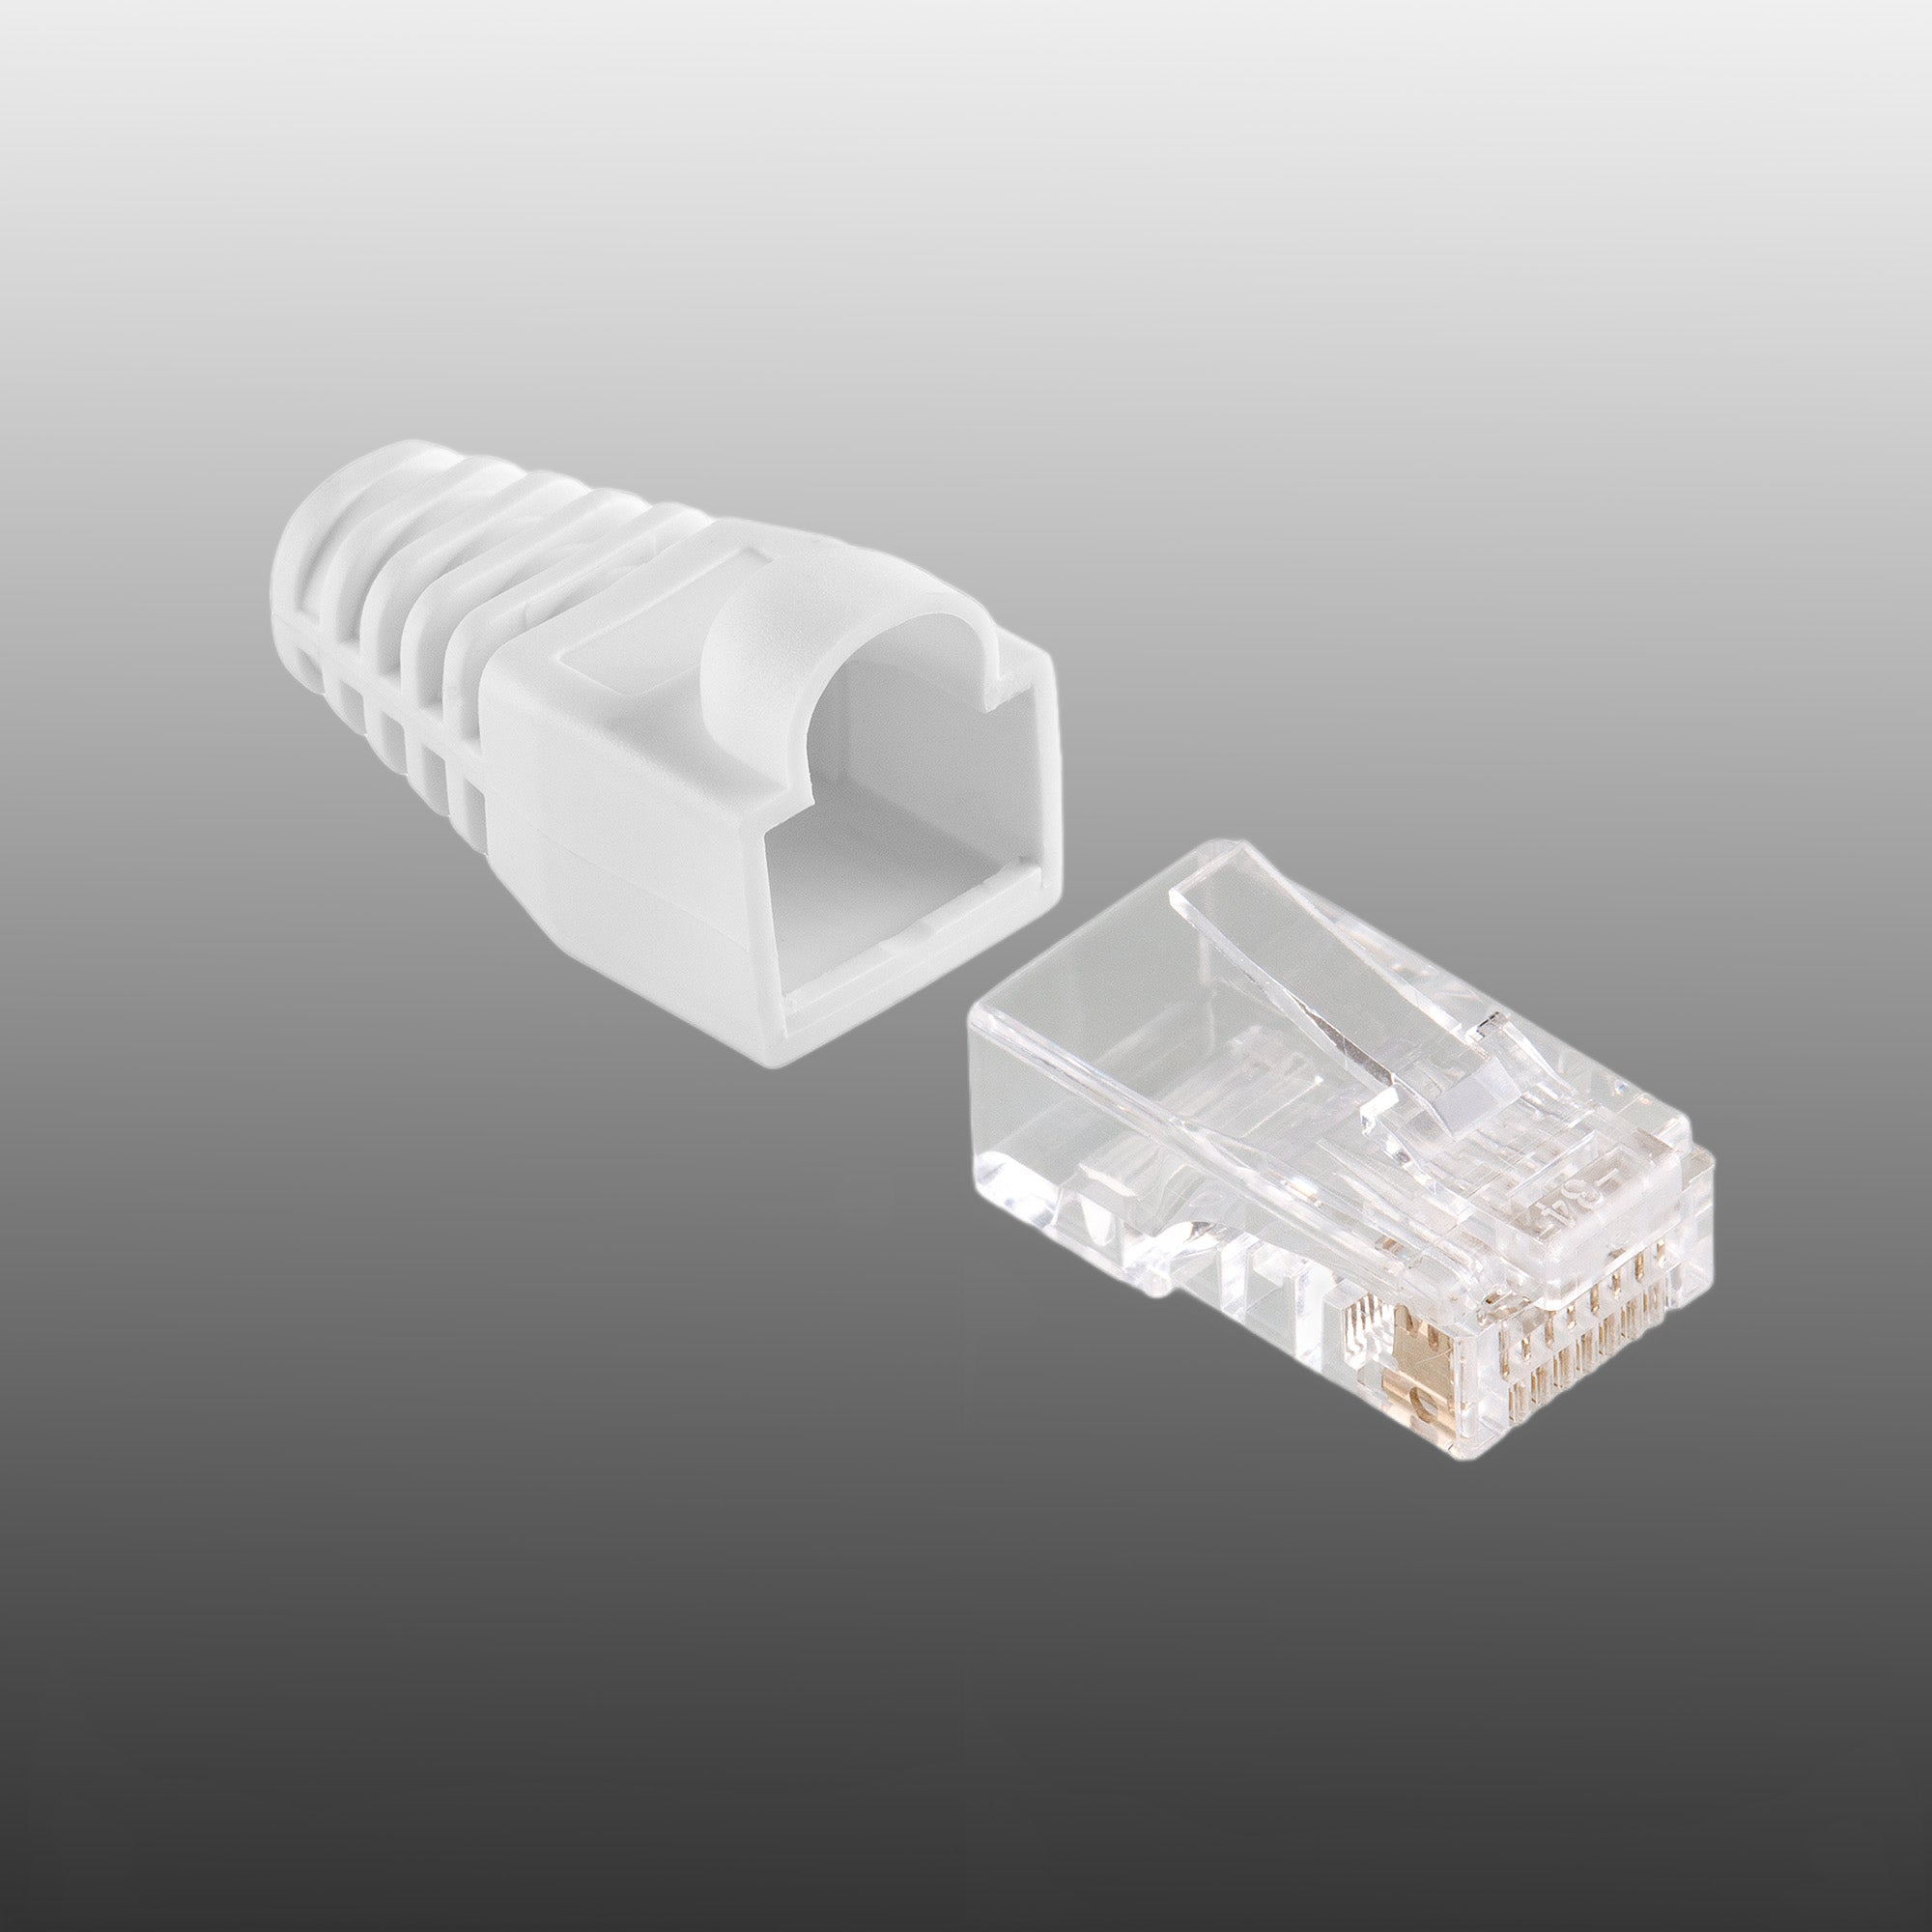 How to Wire CAT6 RJ45 Ethernet Plug with Boots